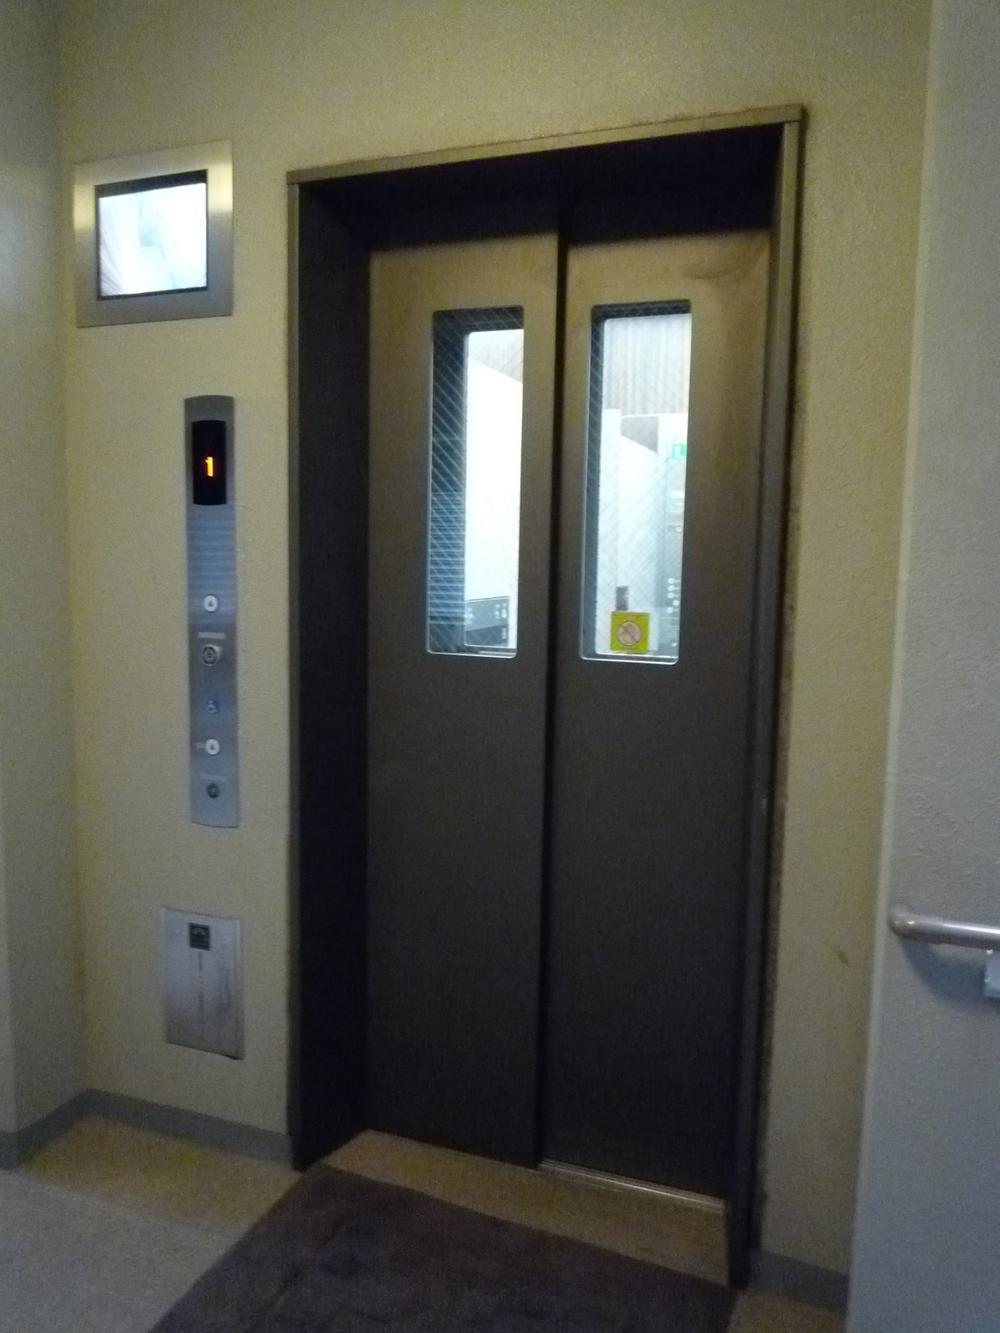 Other common areas. Auto-lock Elevator (2013 October shooting)